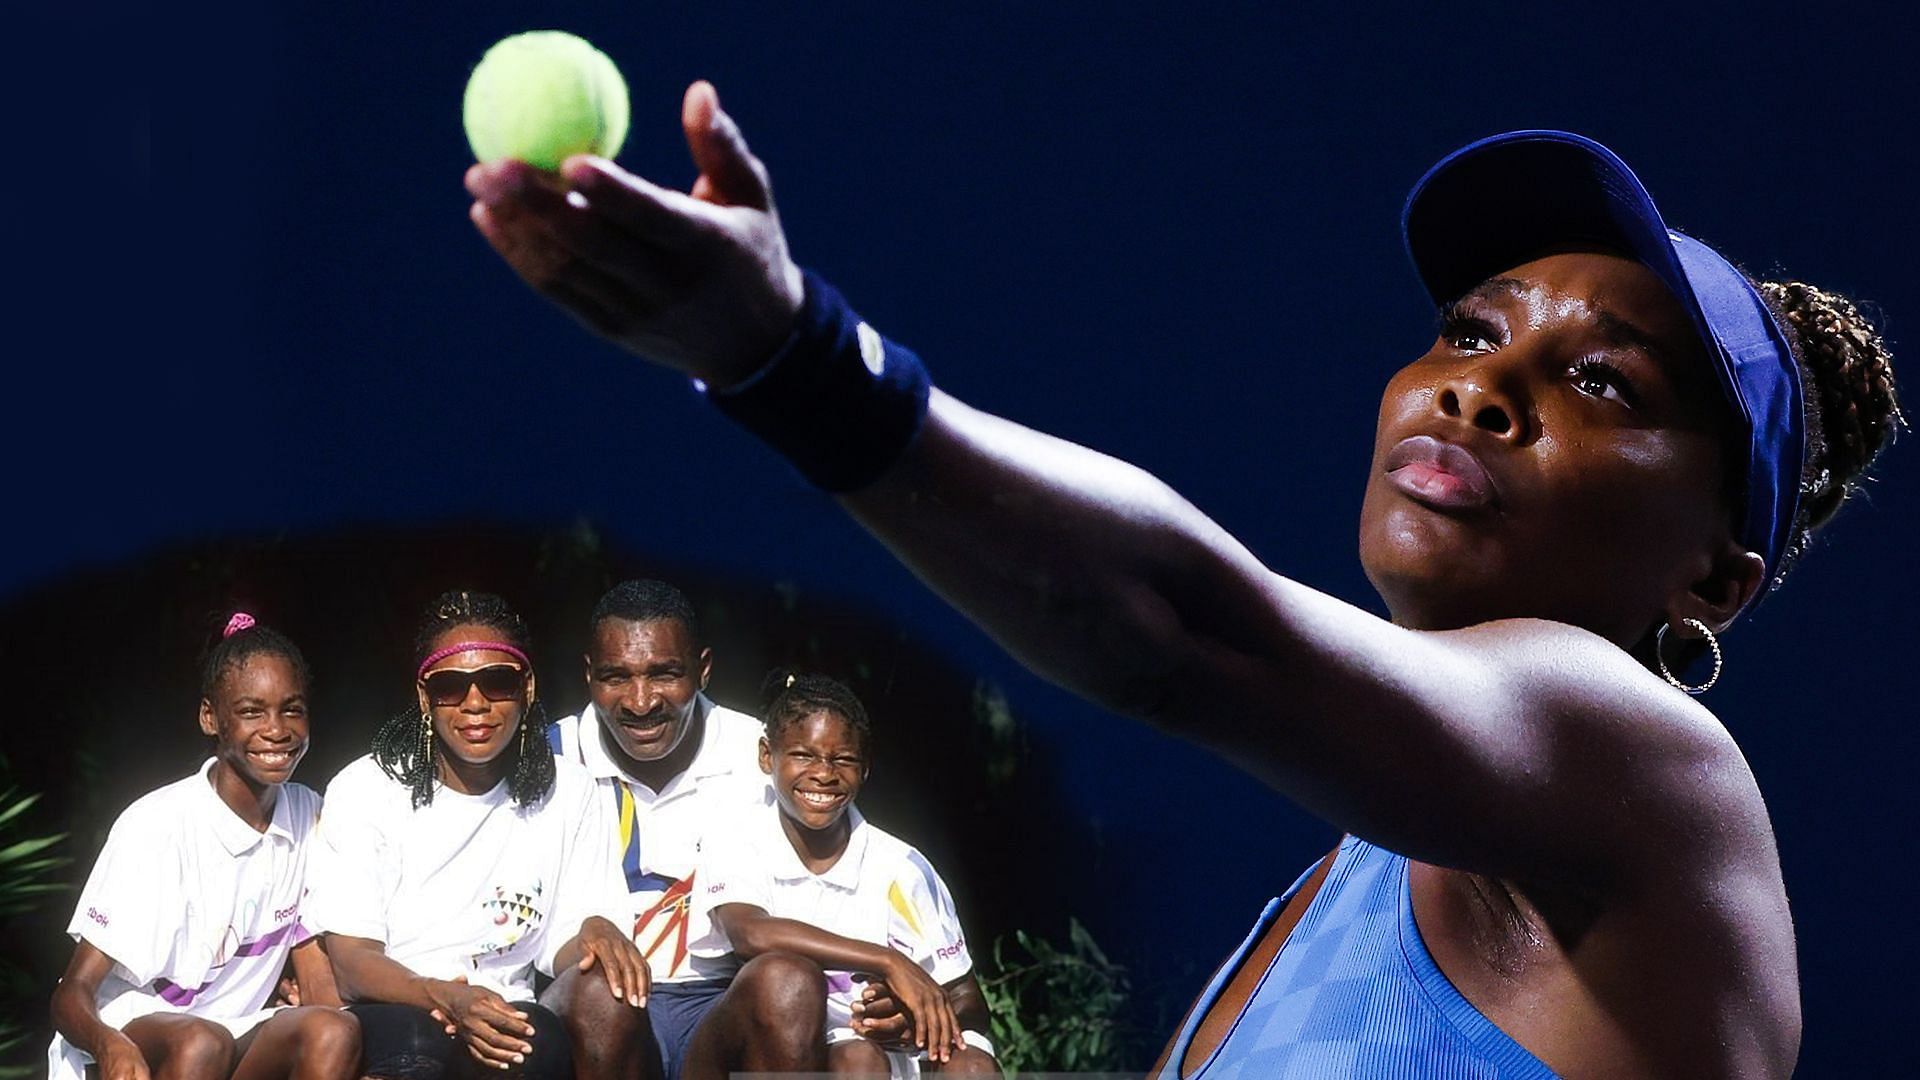 Venus Williams on her and Serena Williams being raised as African-Americans